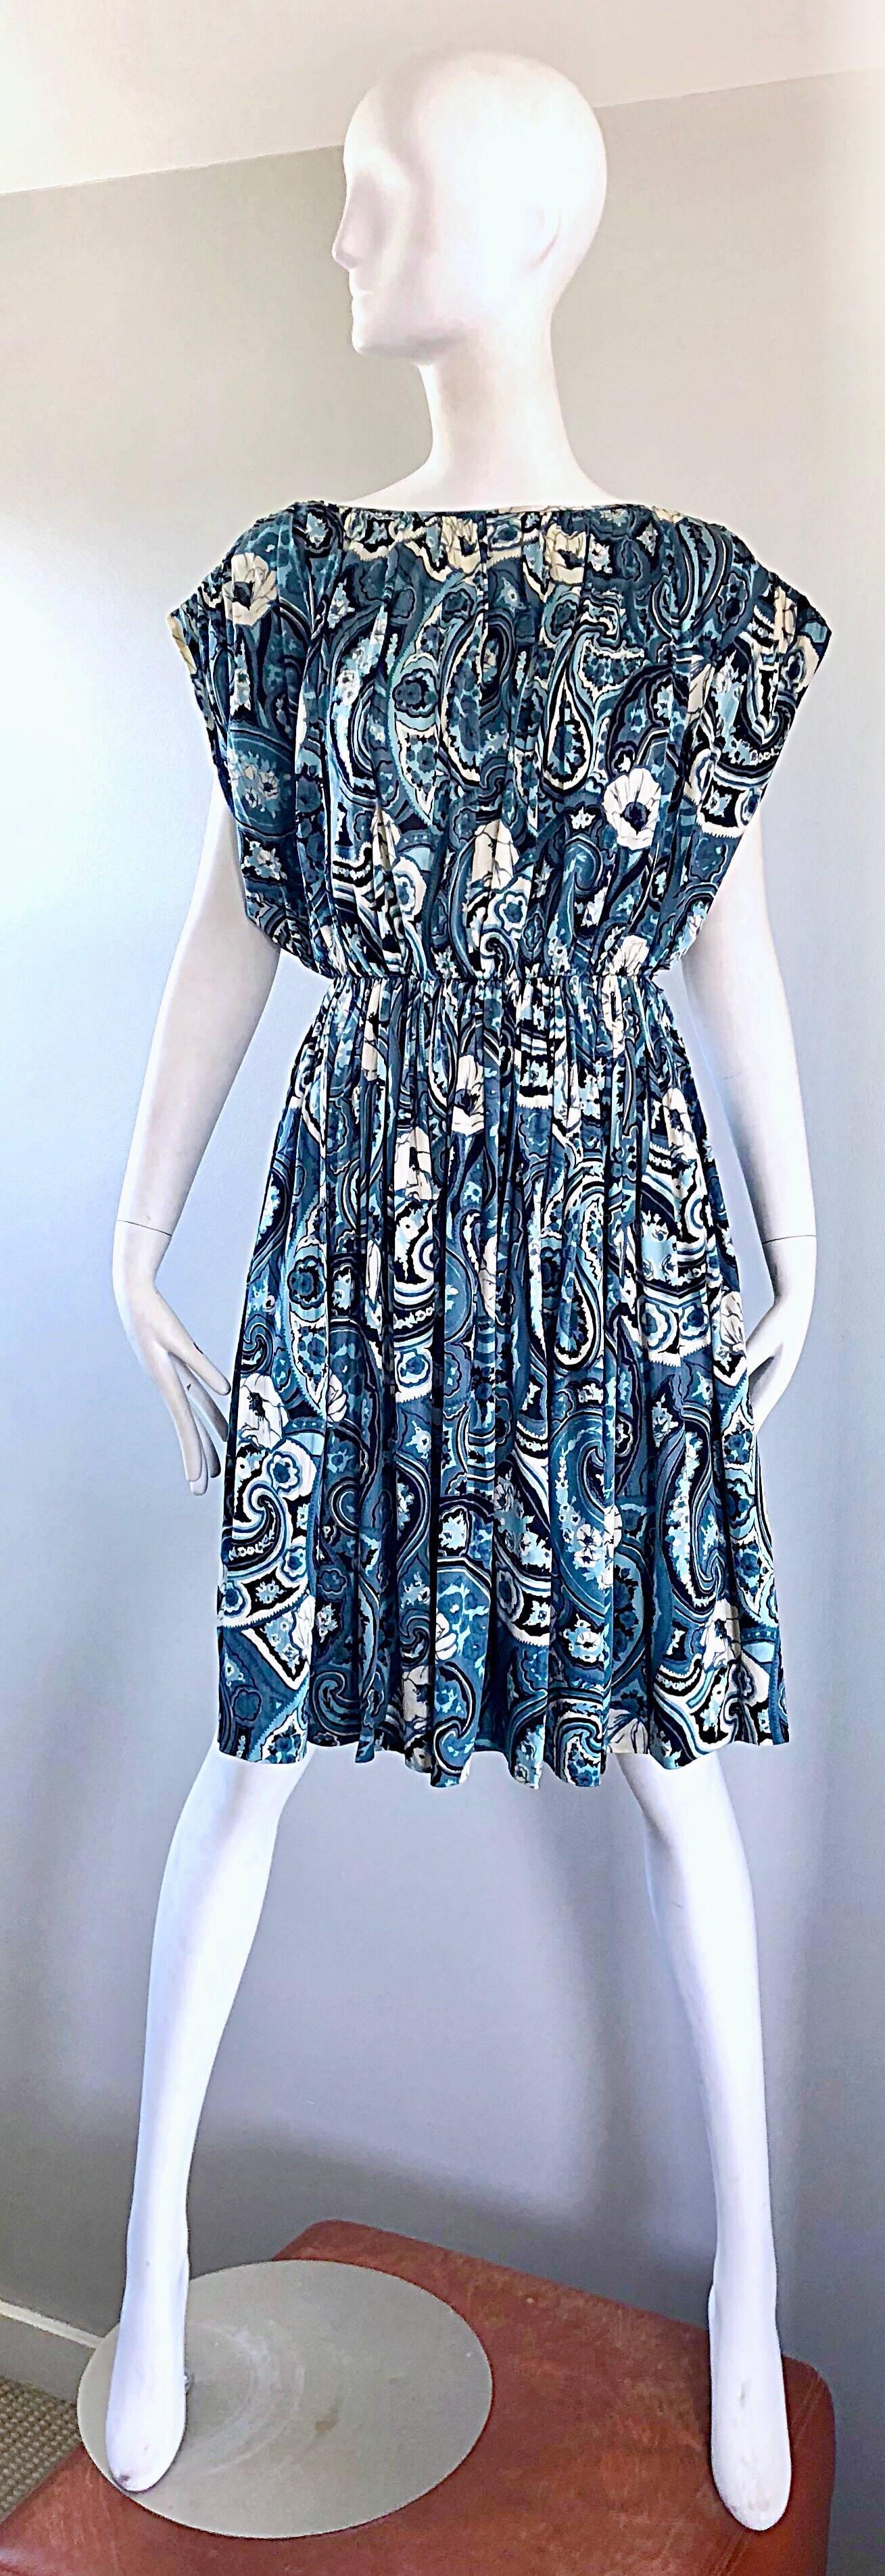 Beautiful and rare late 70s TOWNLEY for NEIMAN MARCUS blue and white paisley flower print Avant Garde silk dress! While Townley was recognized as the manufacturer of Claire McCardell, the solo Townley label was only around for a period of time.